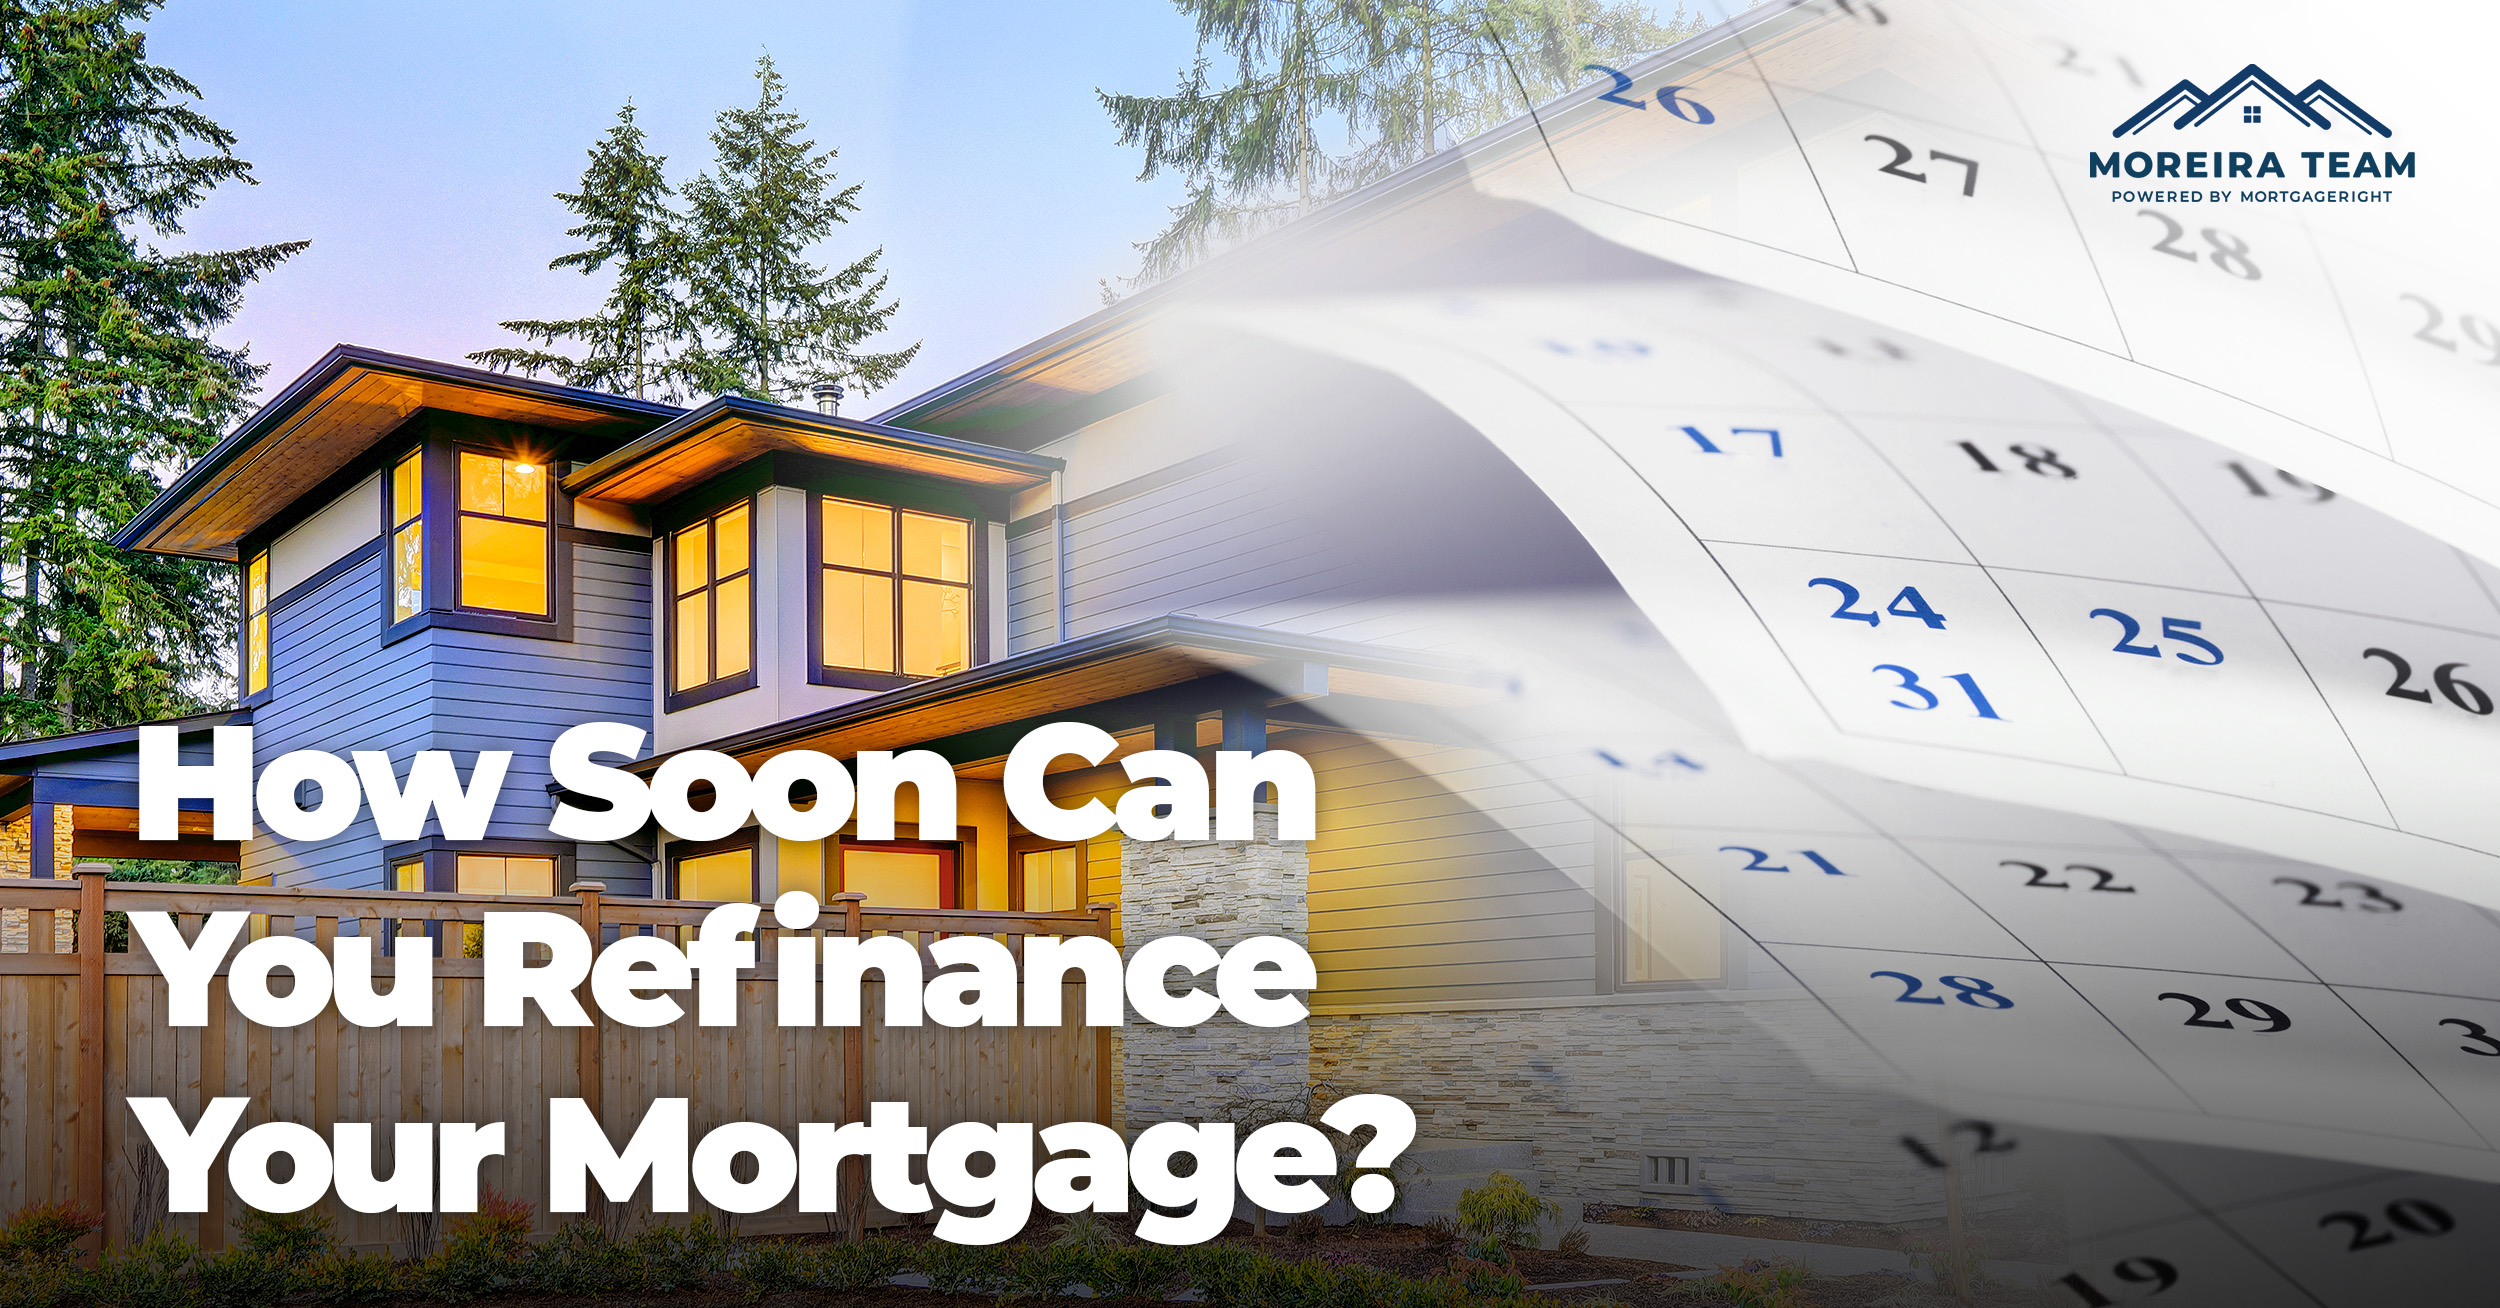 How Soon Can You Refinance a Mortgage?